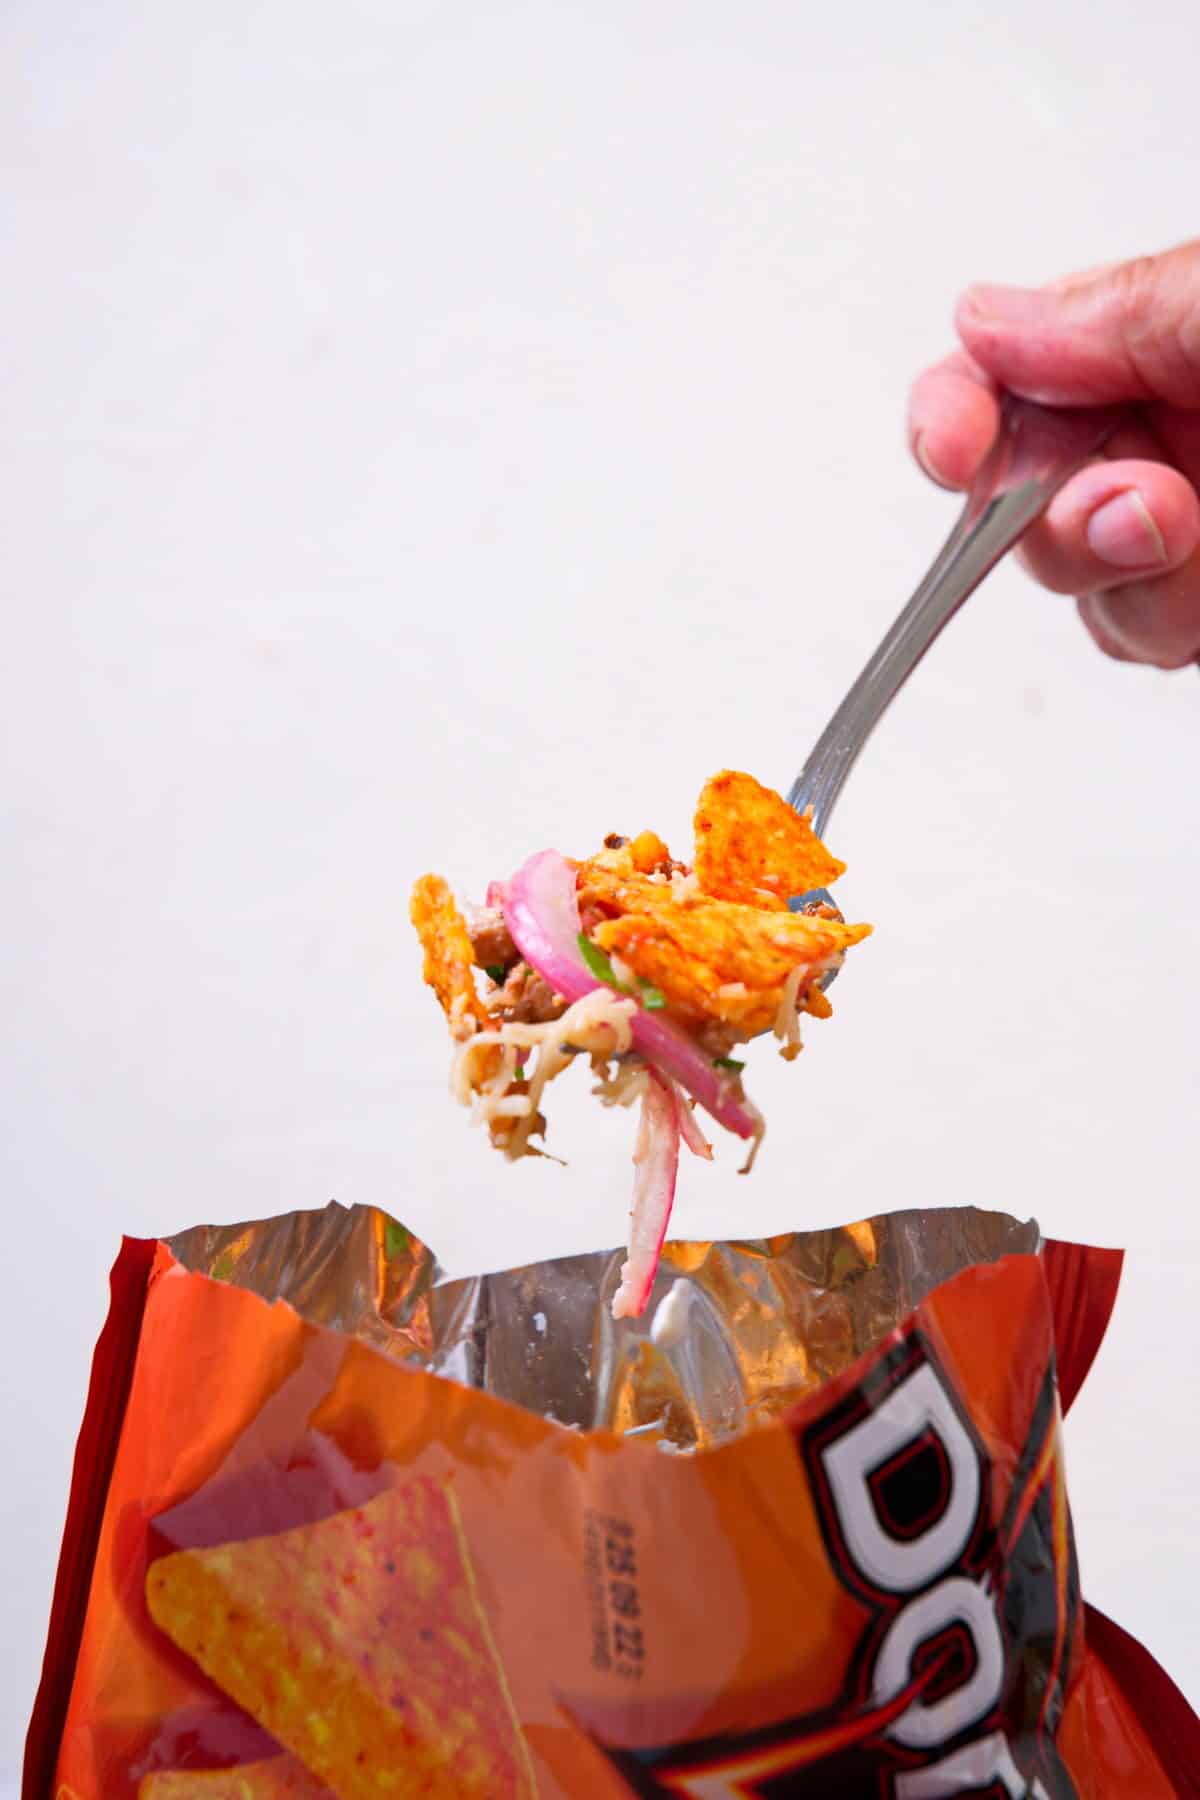 Taco in a bag with a fork on white background.